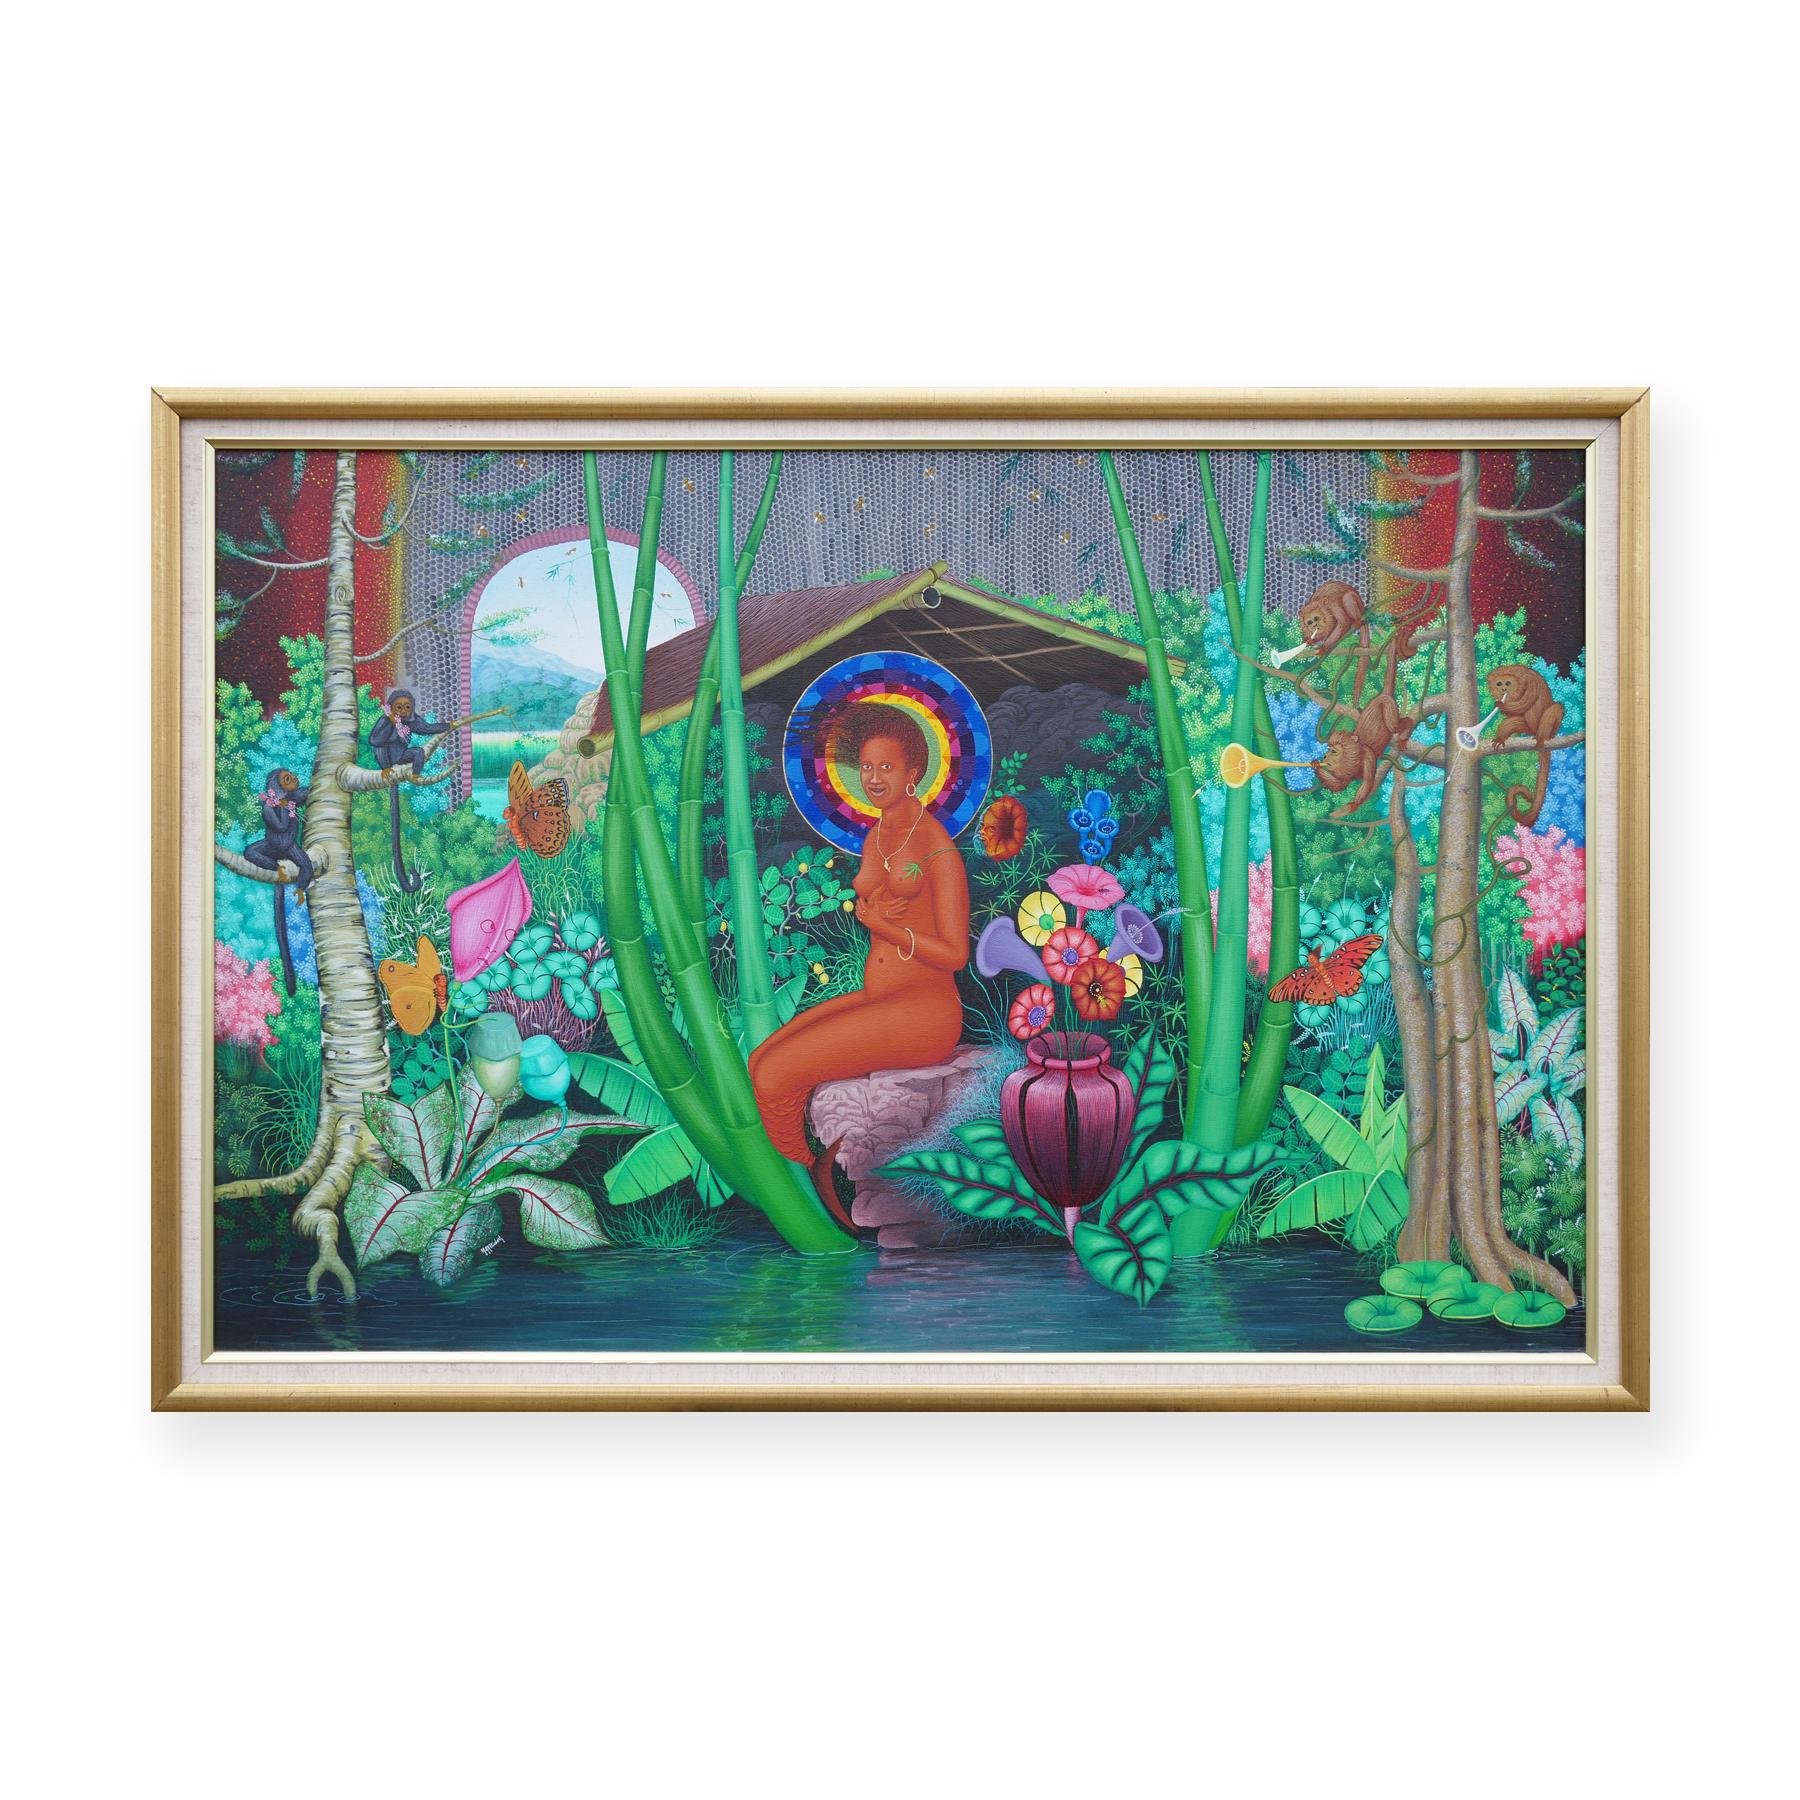 Colorful Tropical Jungle Landscape with Central Nude Female Figure - Painting by Michel-Ange Altidor